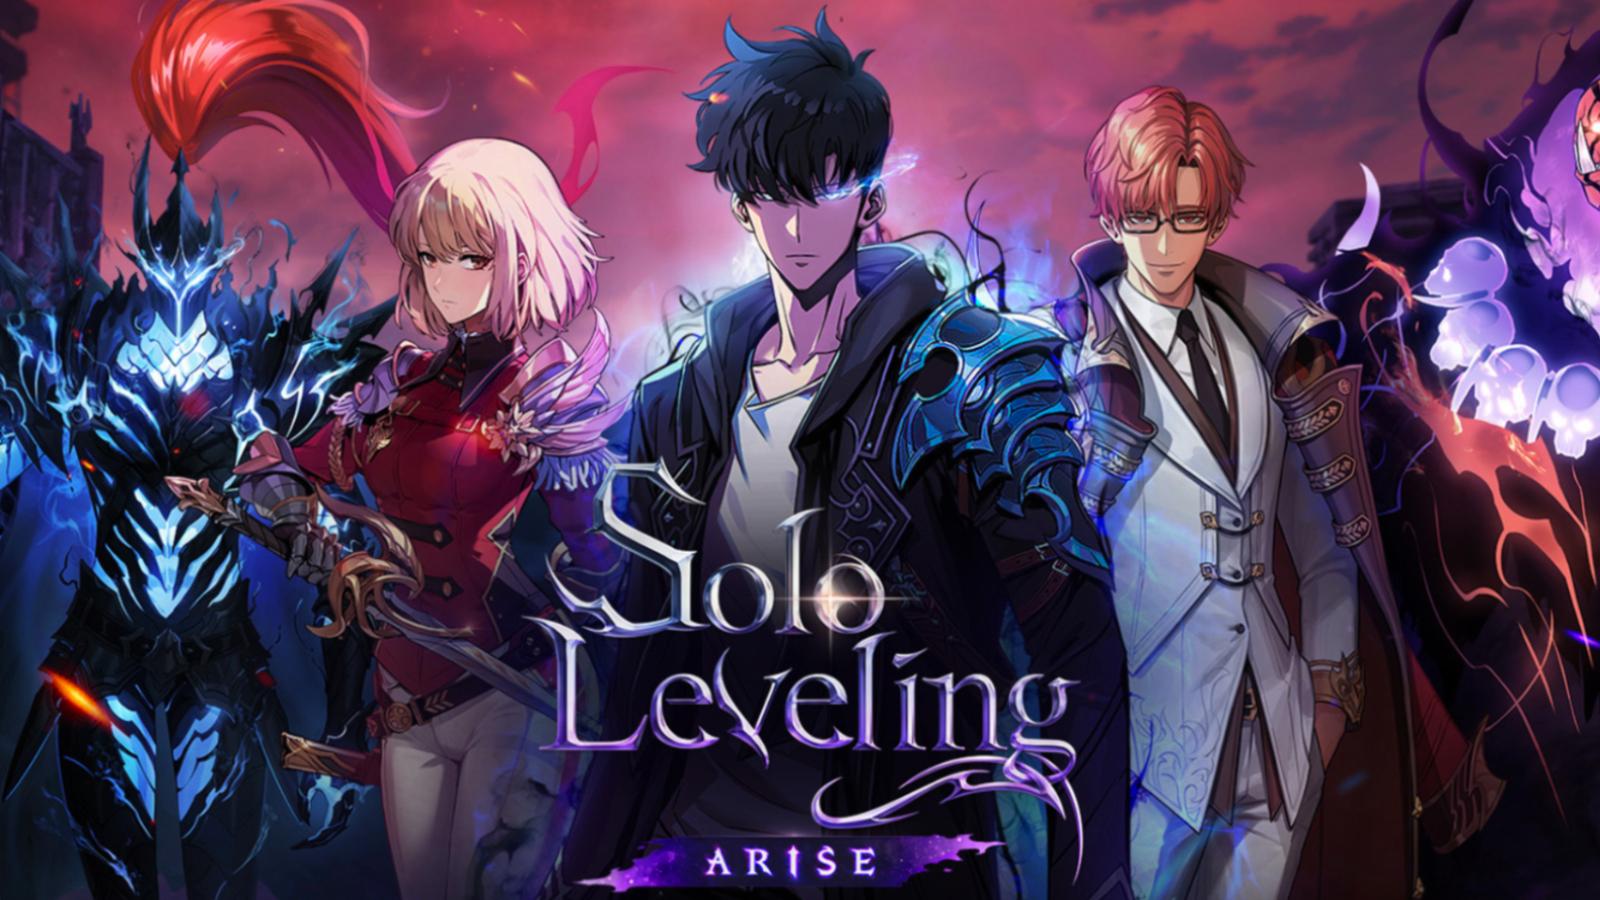 Solo Leveling Arise characters.